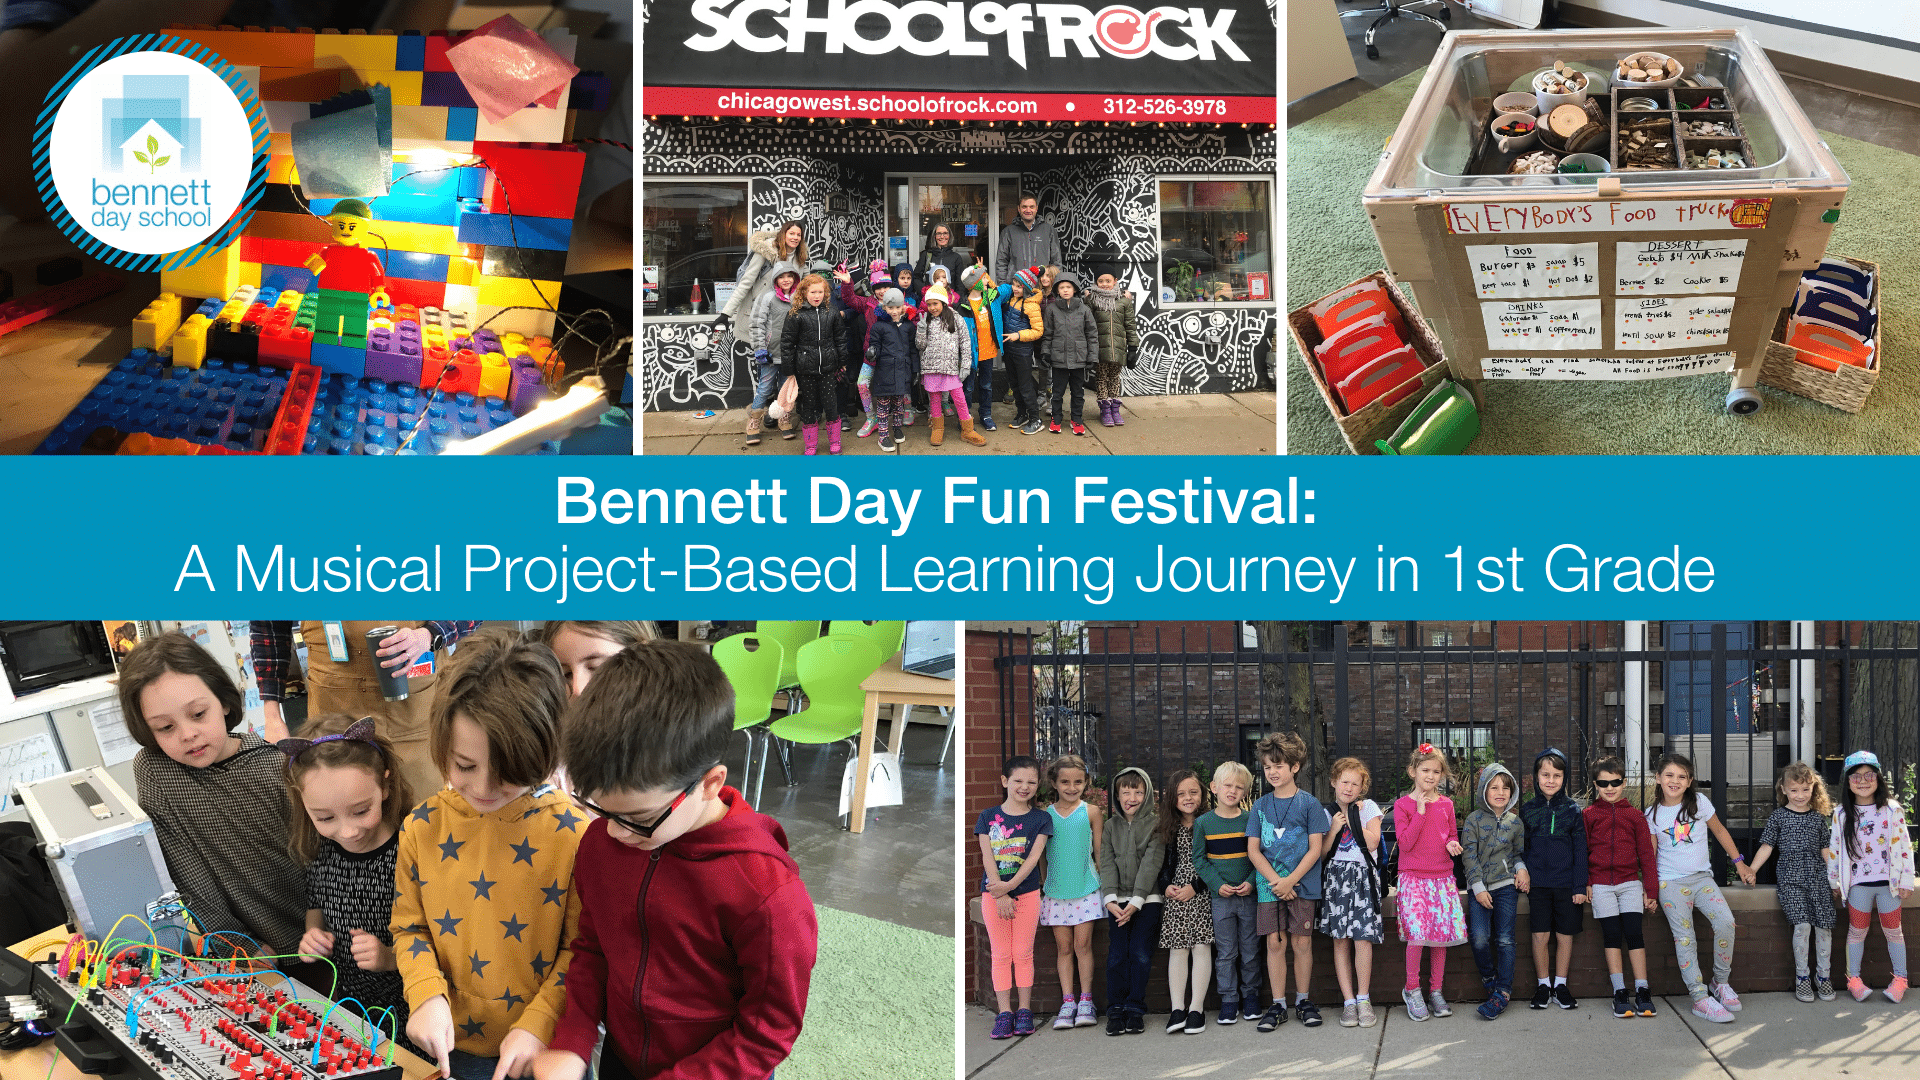 Bennett-Day-Fun-Festival_-A-Musical-Project-Based-Learning-Journey-in-1st-Grade